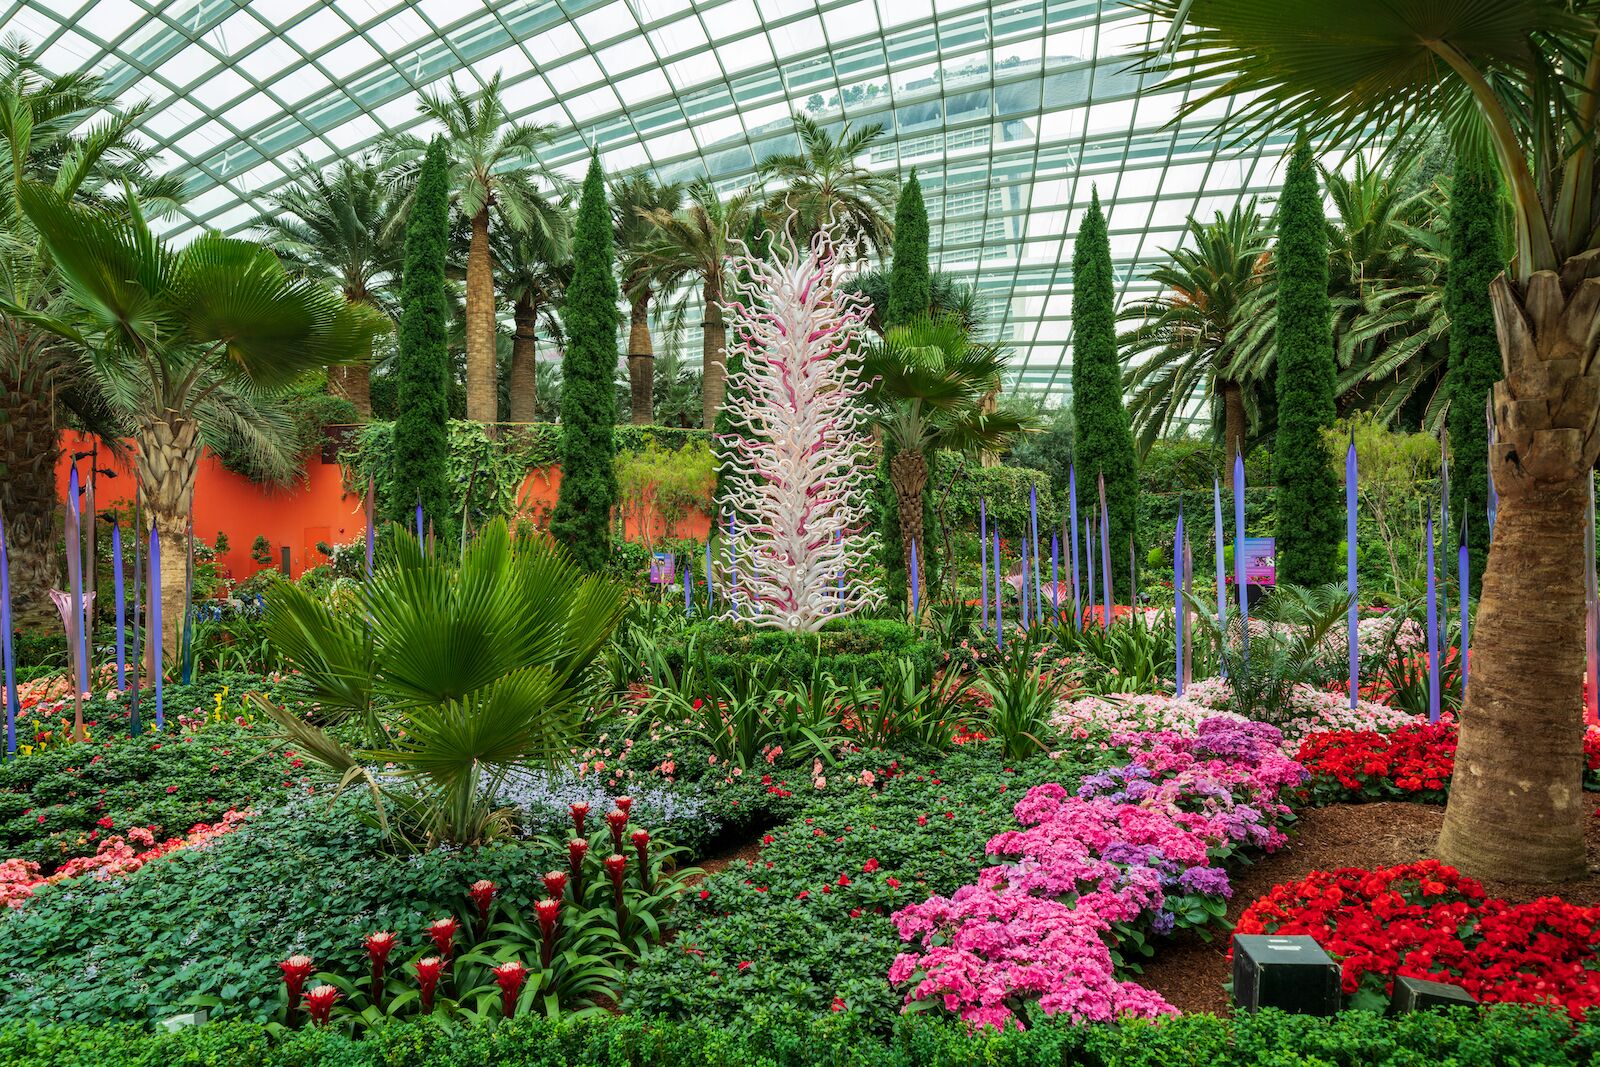 The Flower Dome in Gardens by the Bay in Singapore